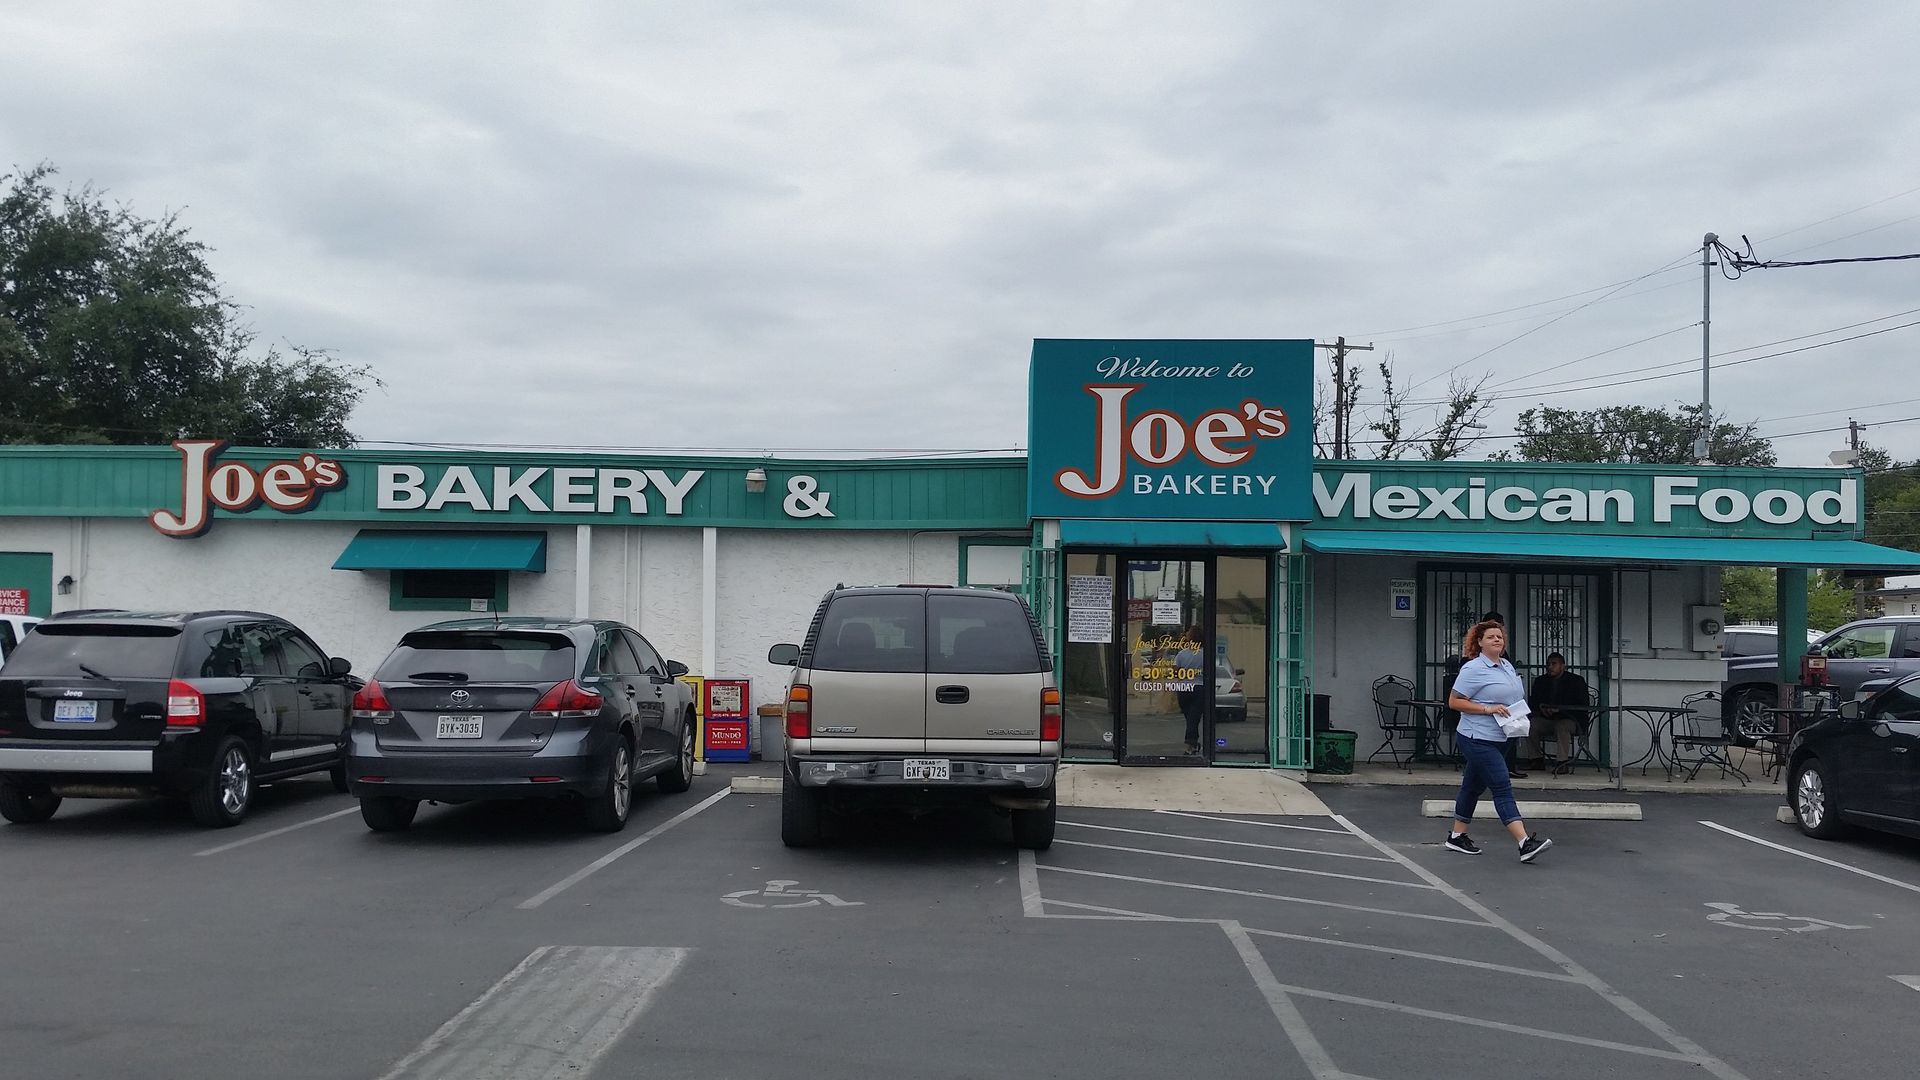 Joe's Bakery - Commercial Metal Roof by Austin Roofing and Construction